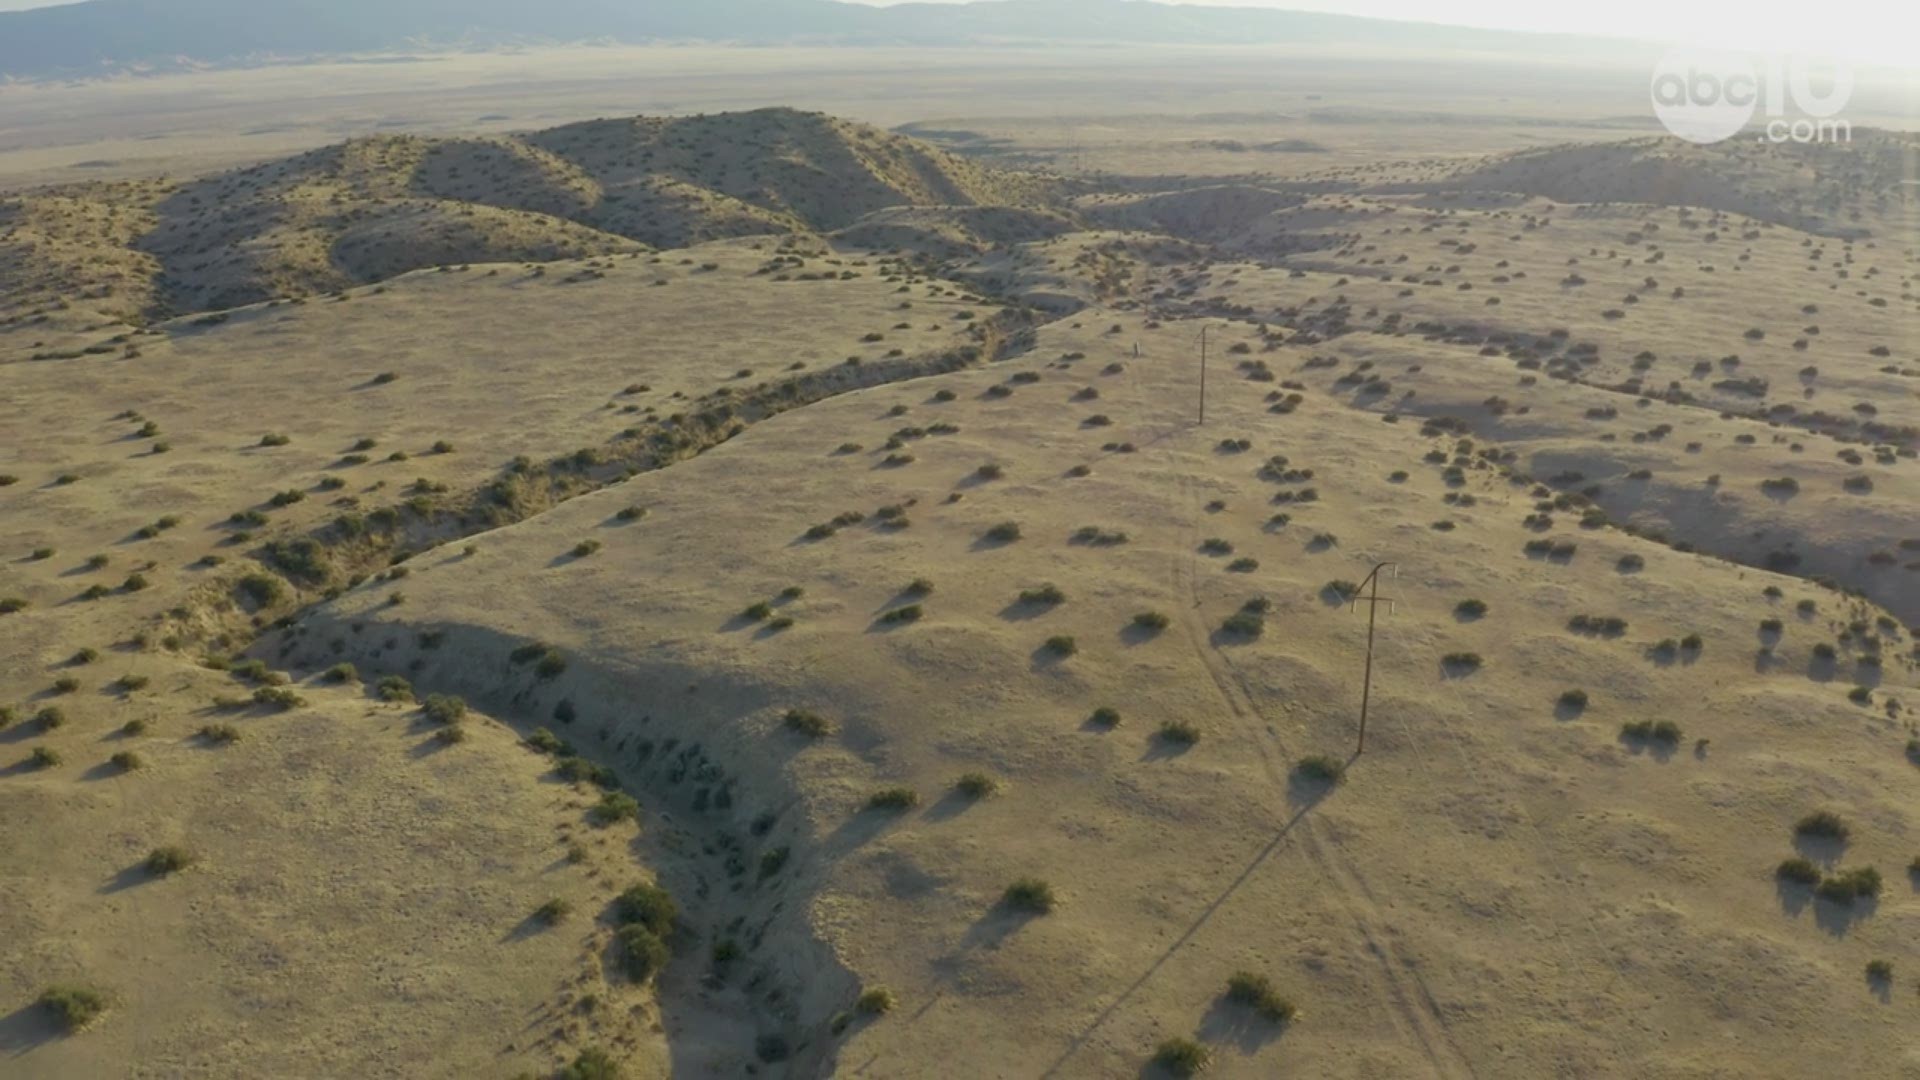 Get an aerial view of the San Andreas fault. This video was captured with a drone west of Taft, California. The fault runs 750 miles through California.